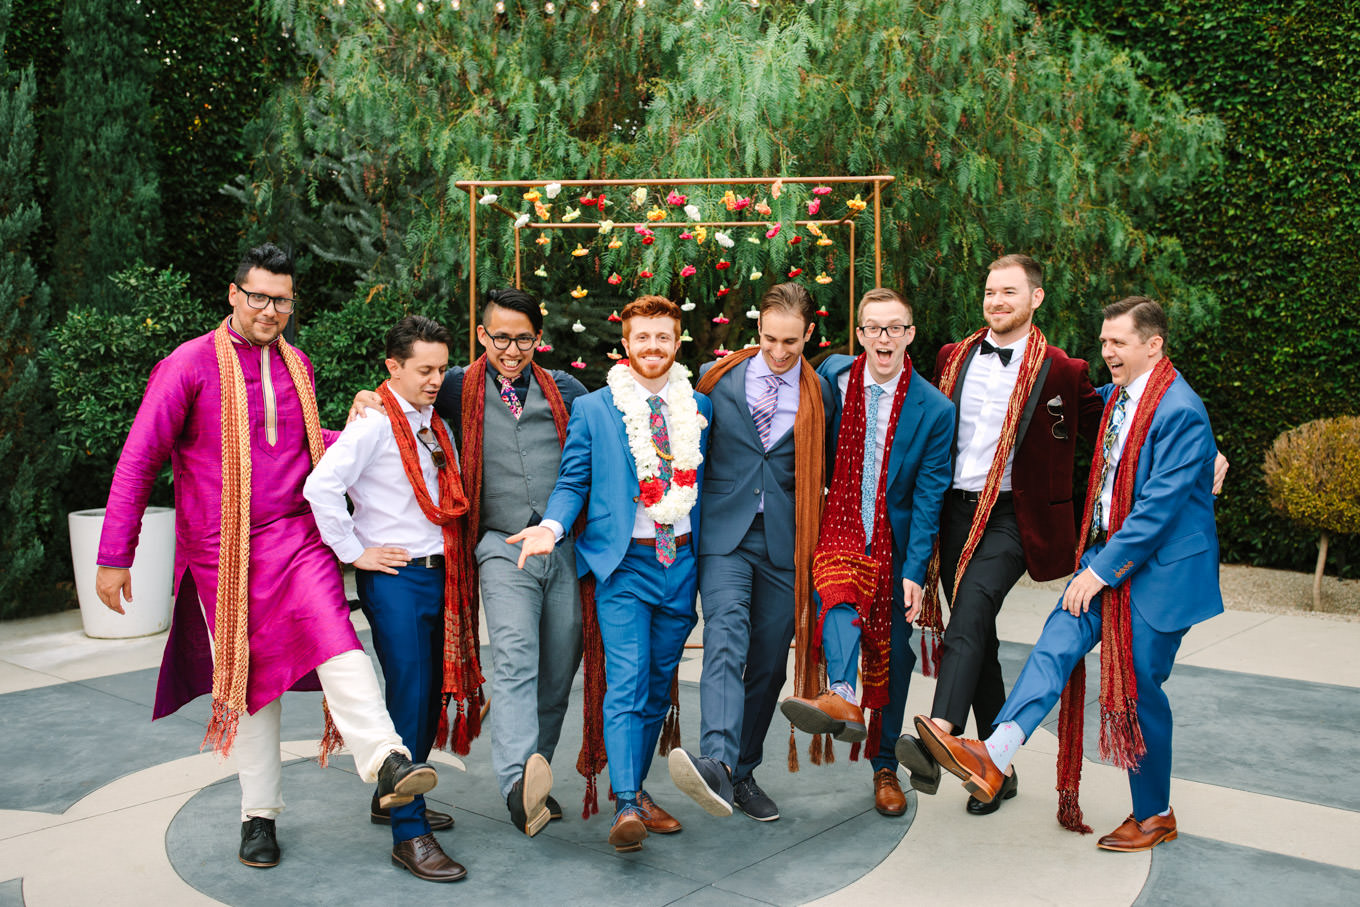 Groom and groomsmen showing off eclectic socks. Two Disney artists create a unique and colorful Indian Fusion wedding at The Fig House Los Angeles, featured on Green Wedding Shoes. | Colorful and elevated wedding inspiration for fun-loving couples in Southern California | #indianwedding #indianfusionwedding #thefighouse #losangeleswedding   Source: Mary Costa Photography | Los Angeles